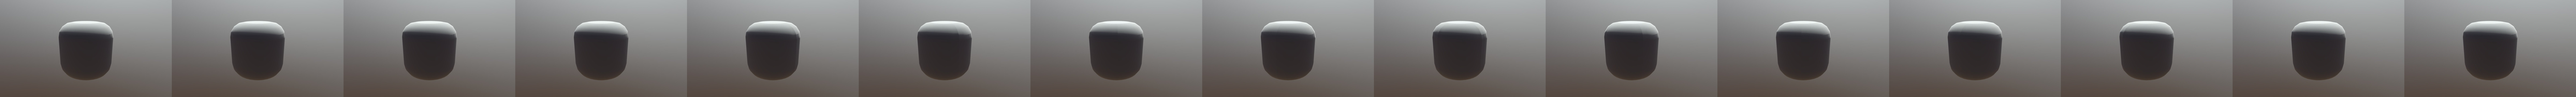 Roblox Head For Blender Download Free 3d Model By Sdfgh13s Sdfgh13s Fd06103 - roblox ipad head